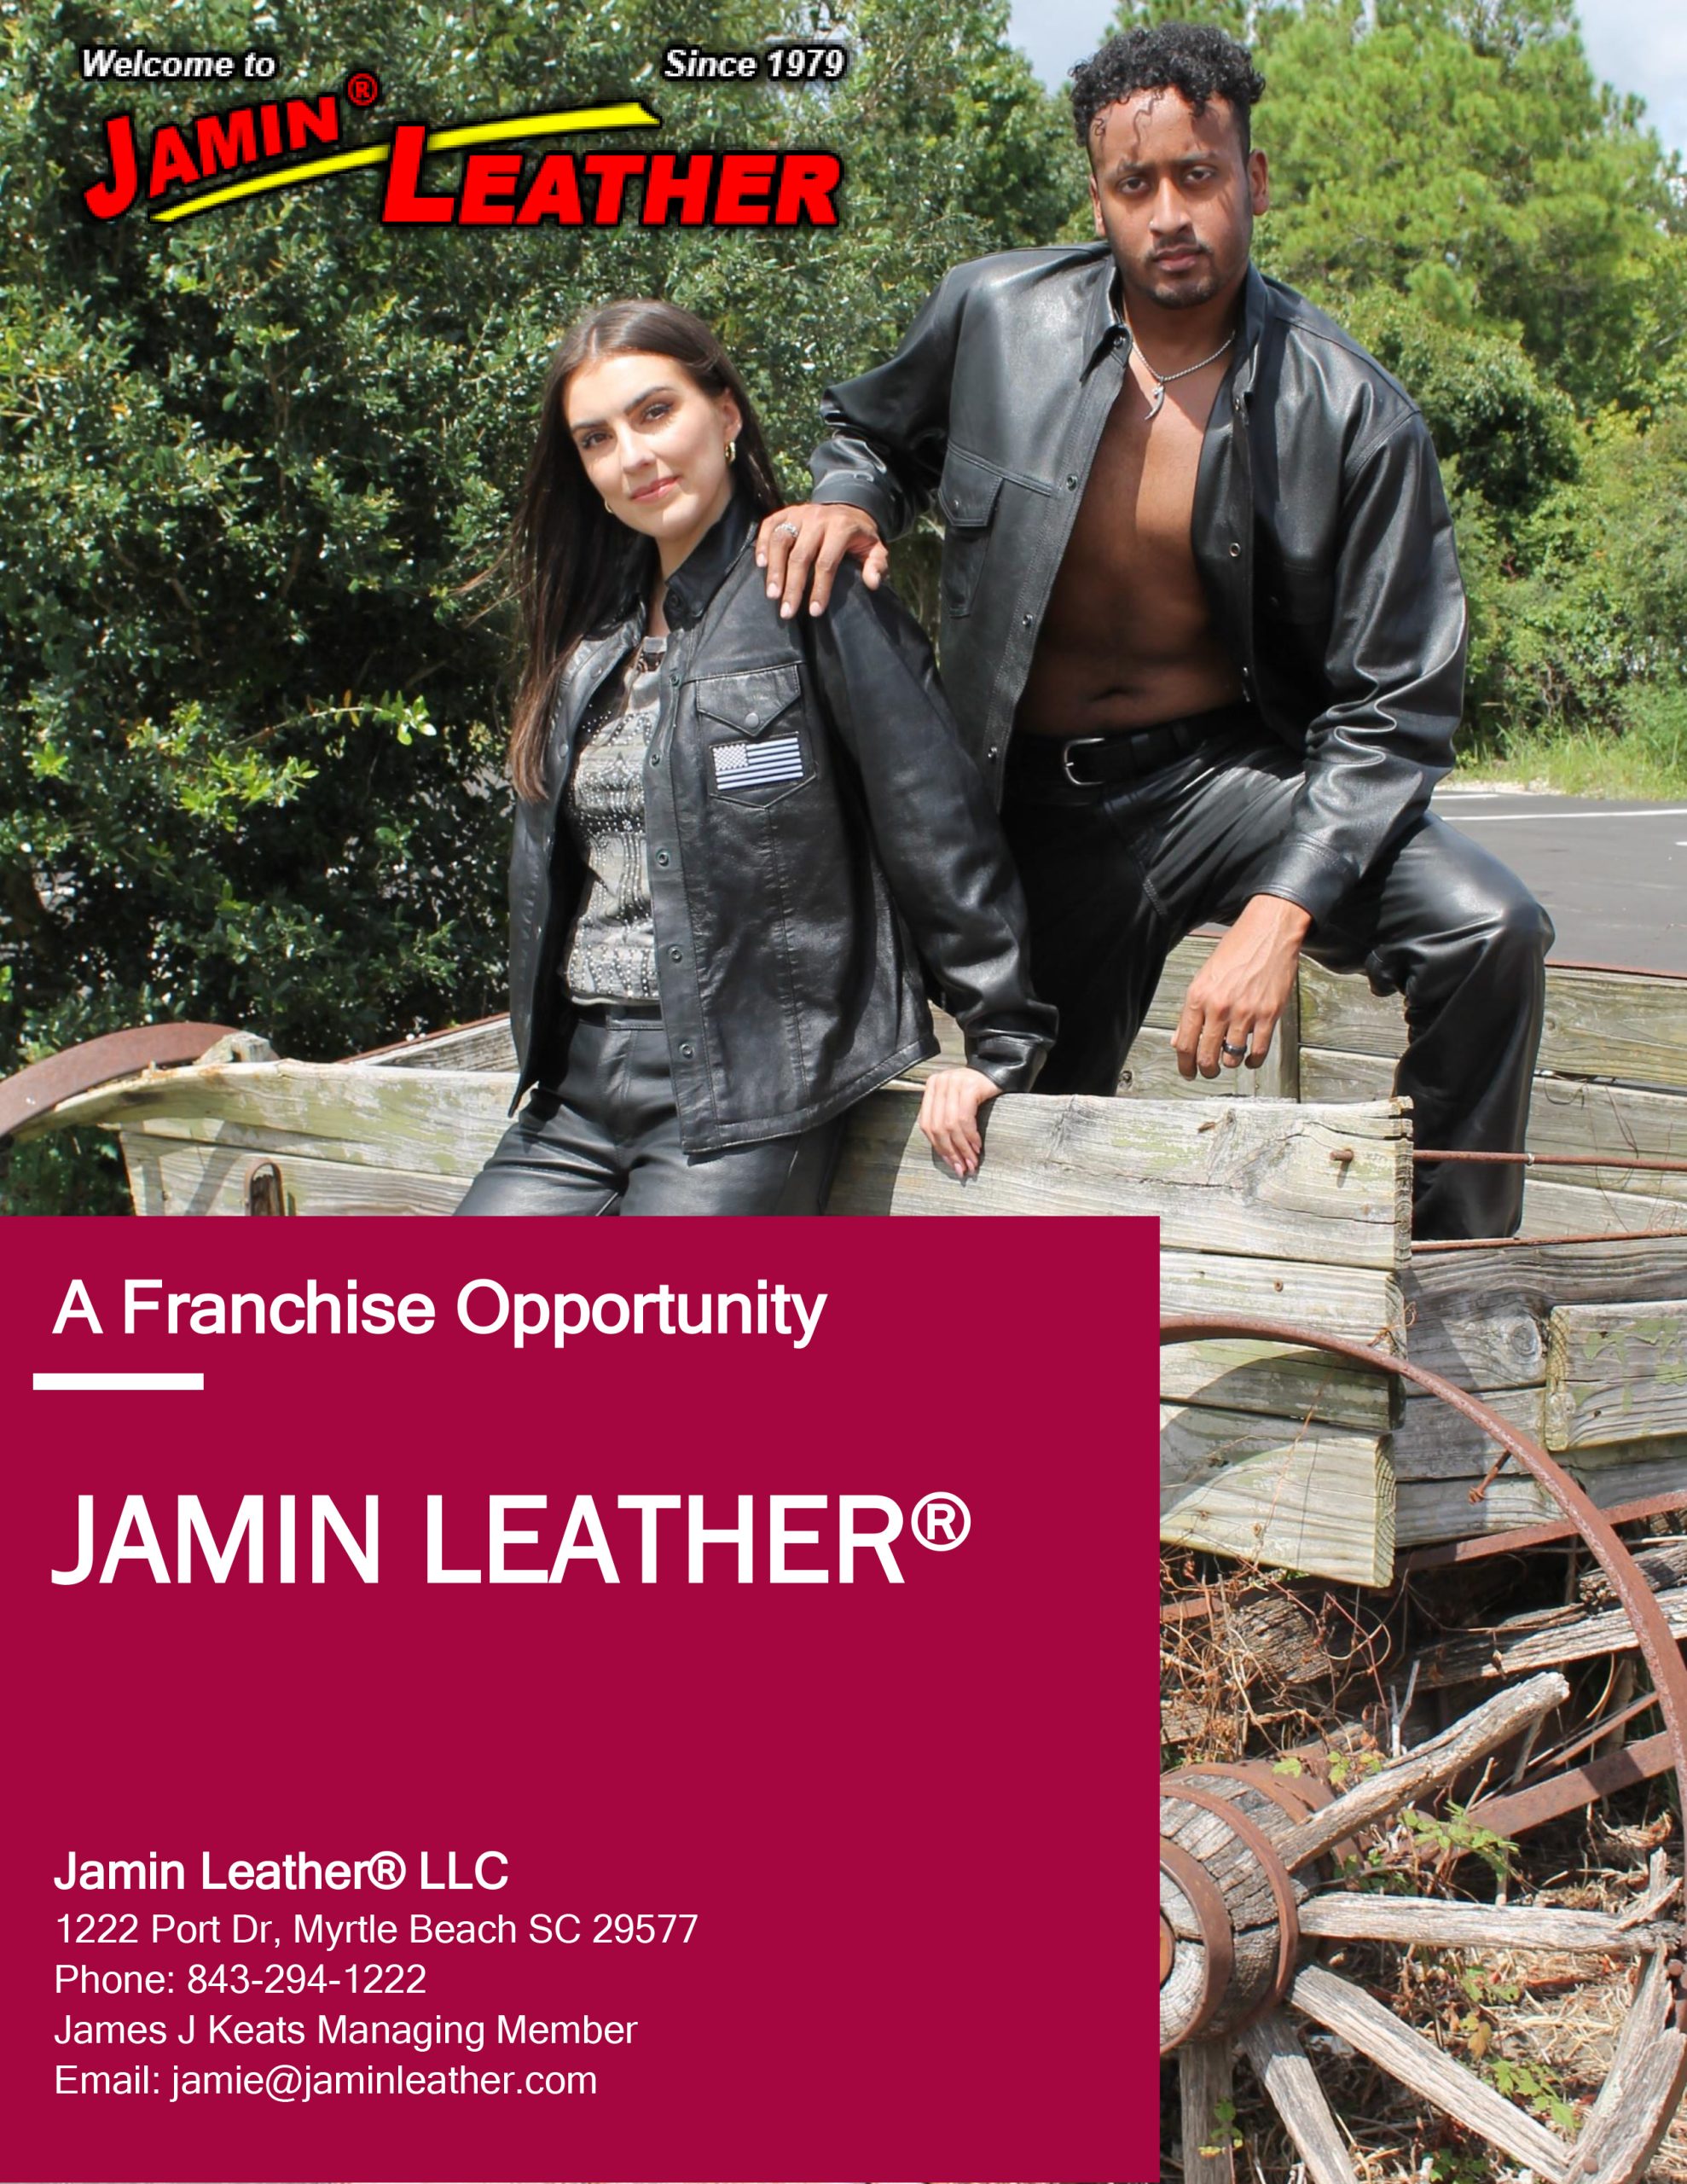 Leather Franchise by Jamin Leather®